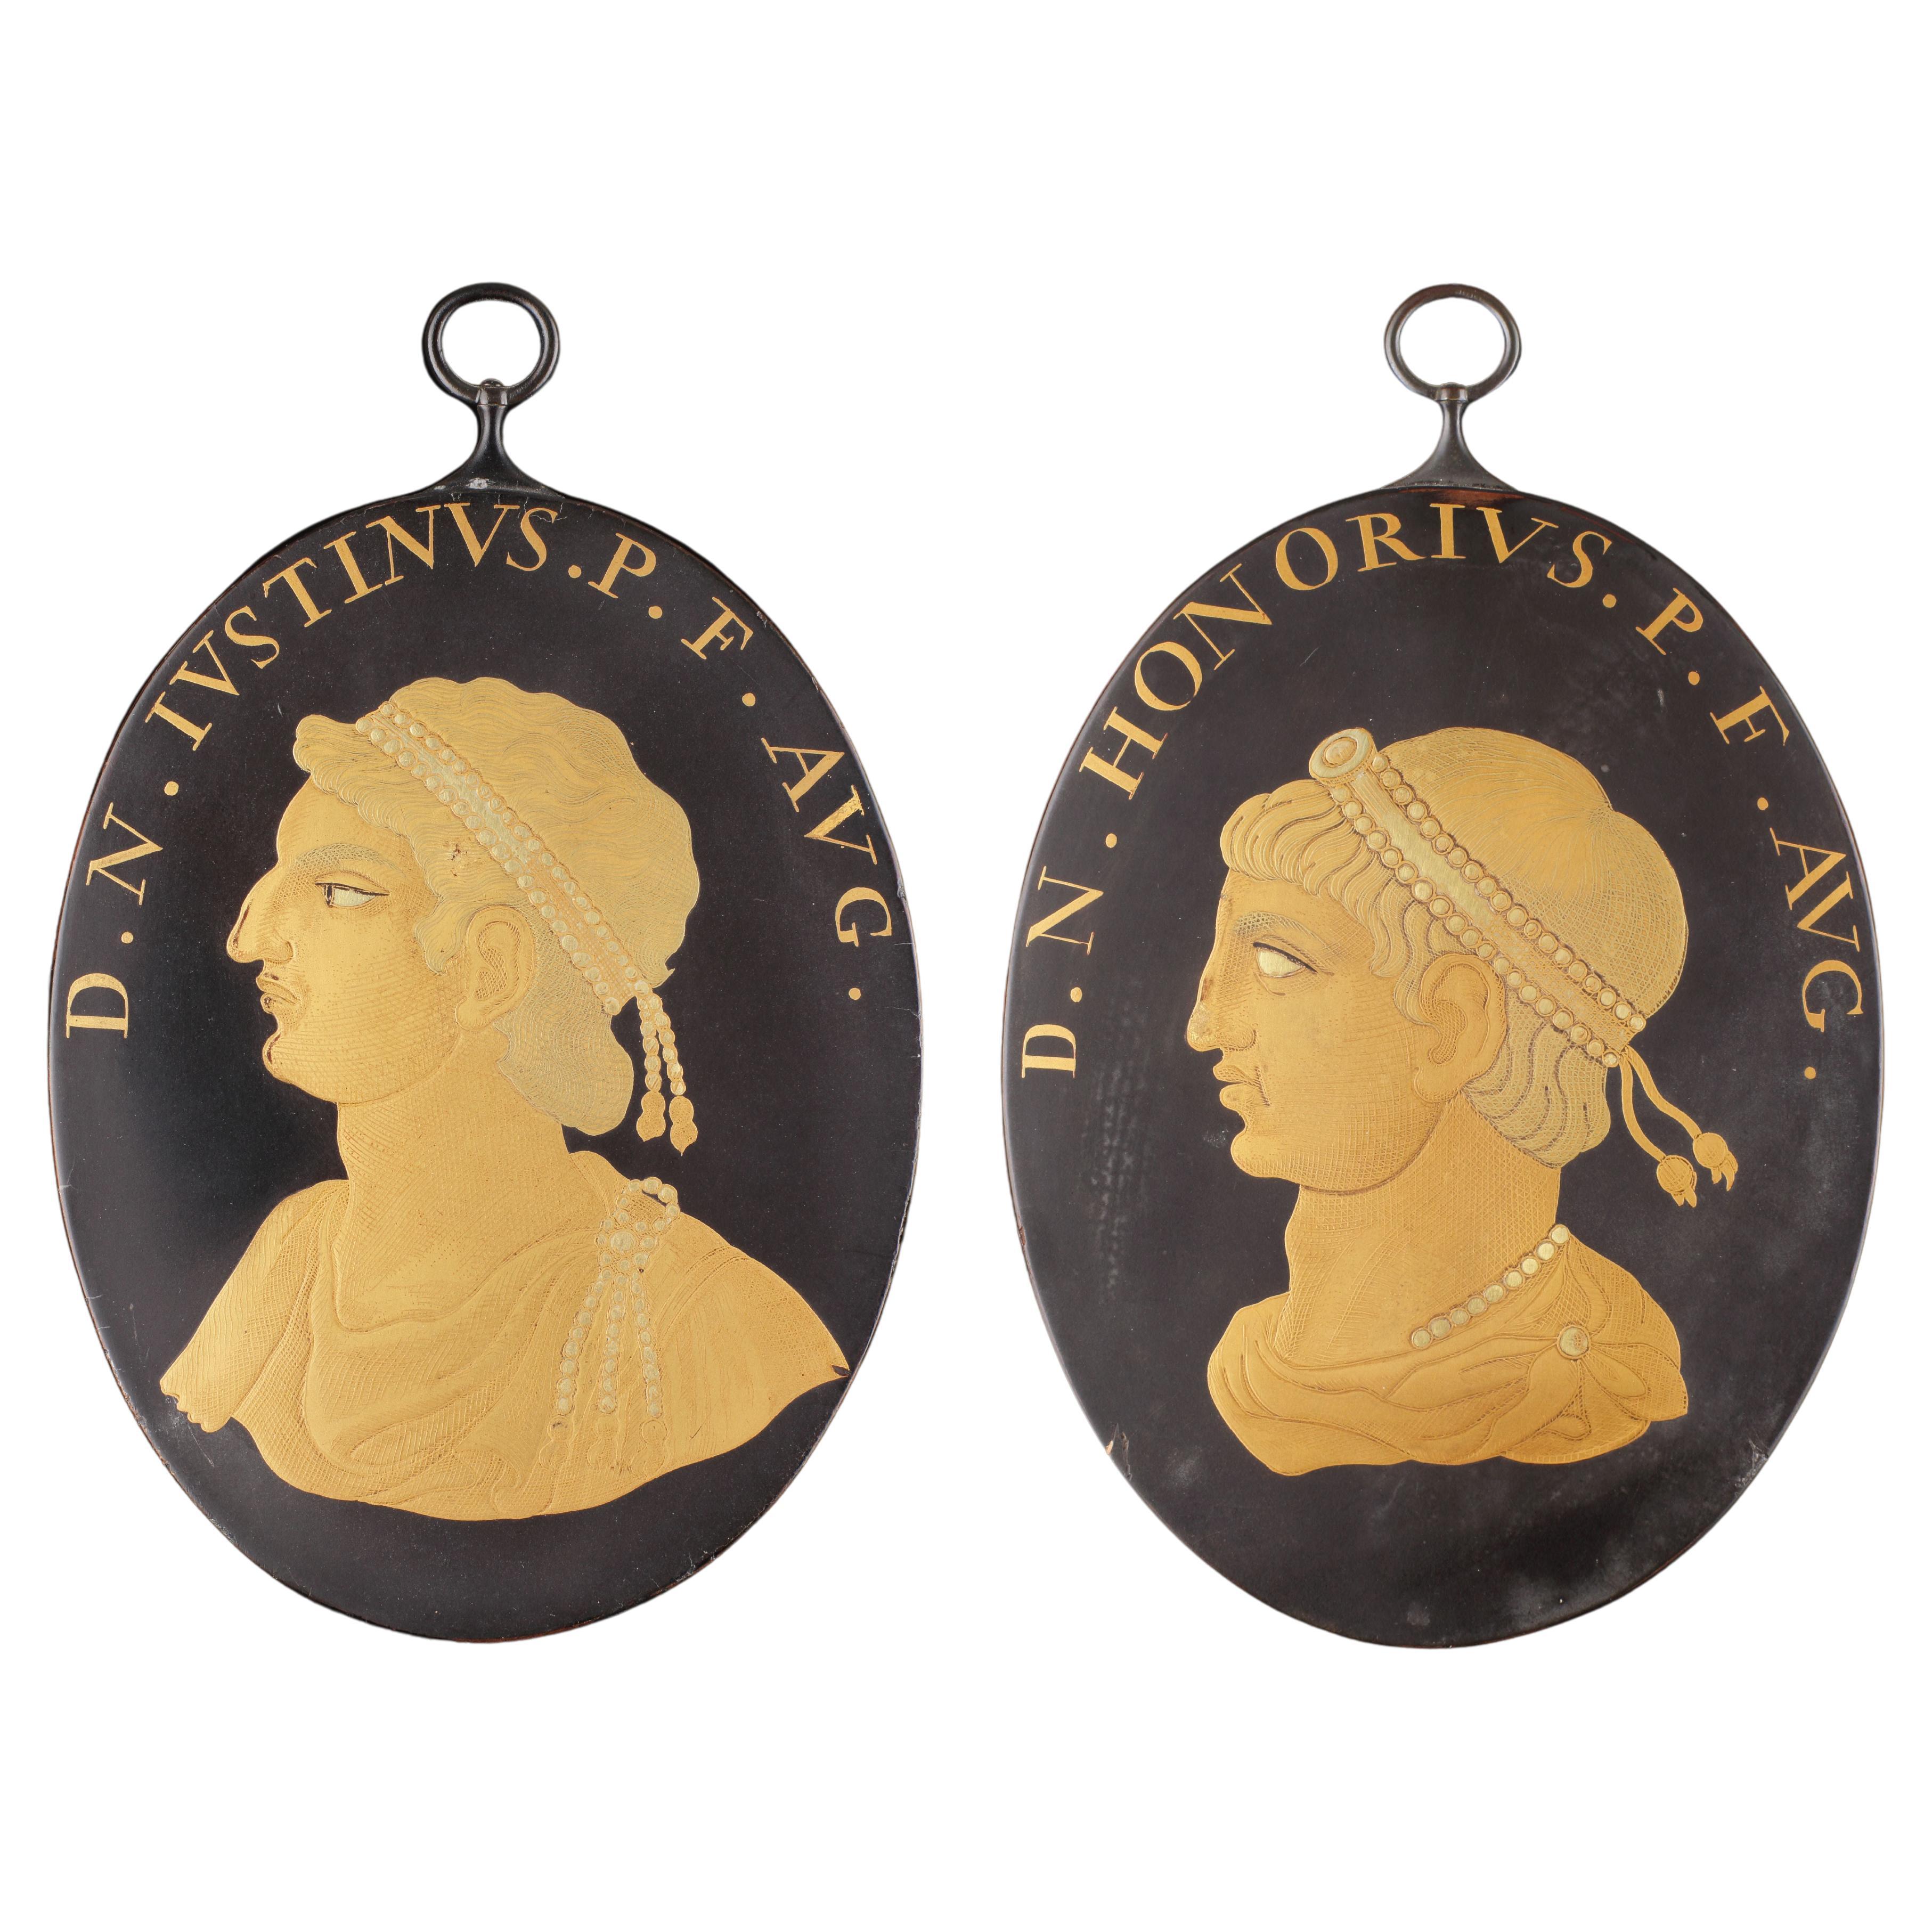 A Rare and Fine Pair of Japanese Export Lacquer Portrait Medallions on Copper